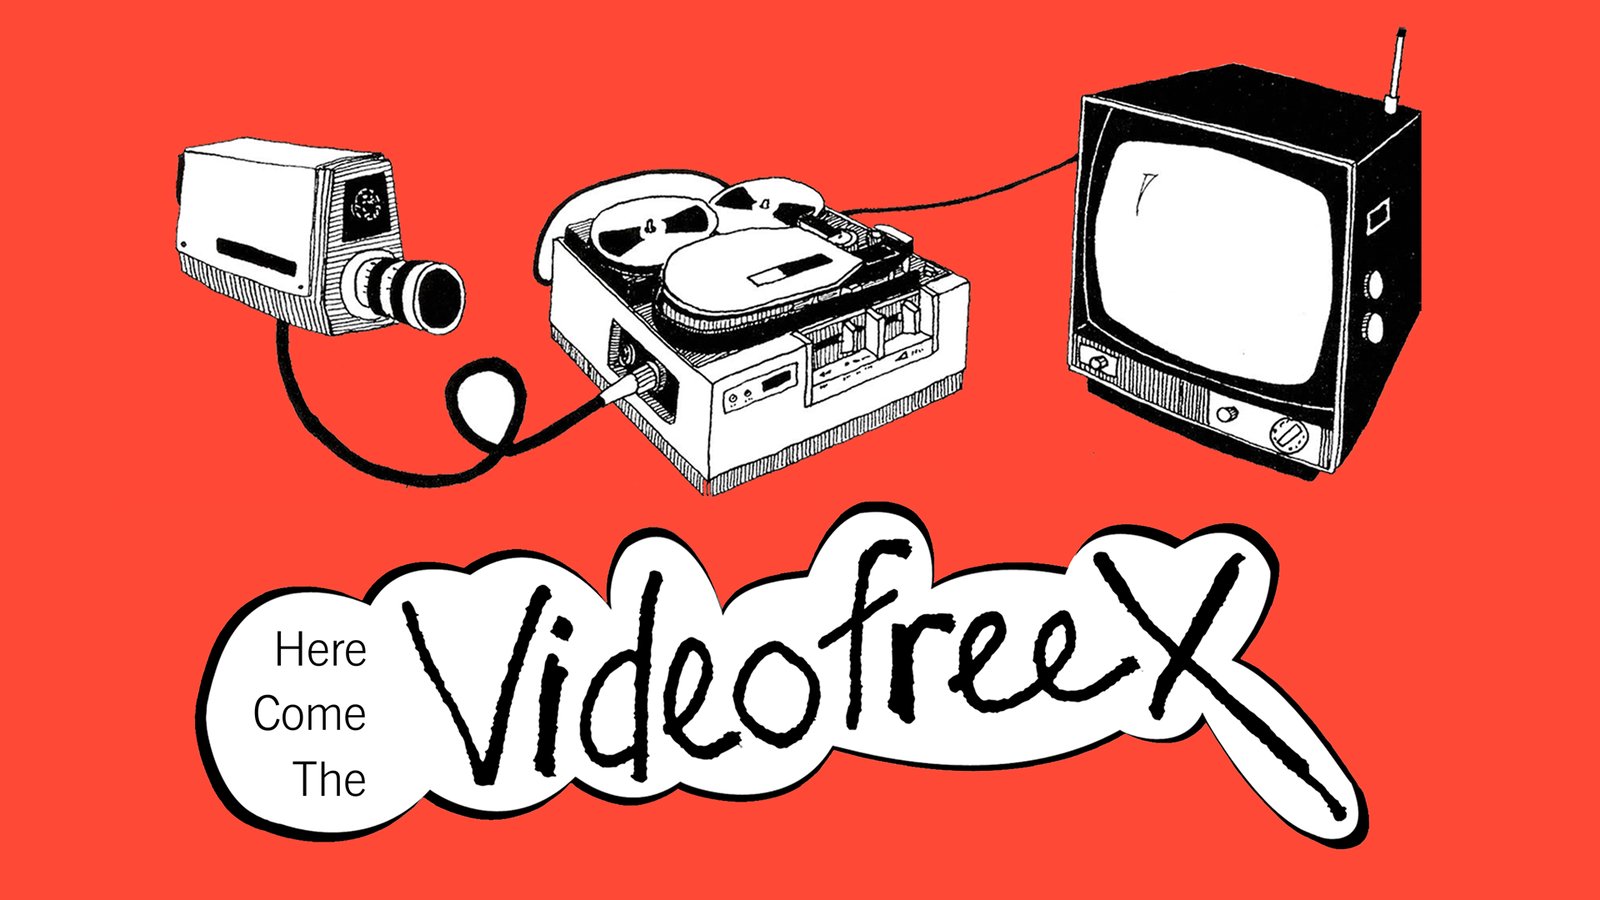 Here Come the Videofreex - Counterculture Documentary of the 1970's